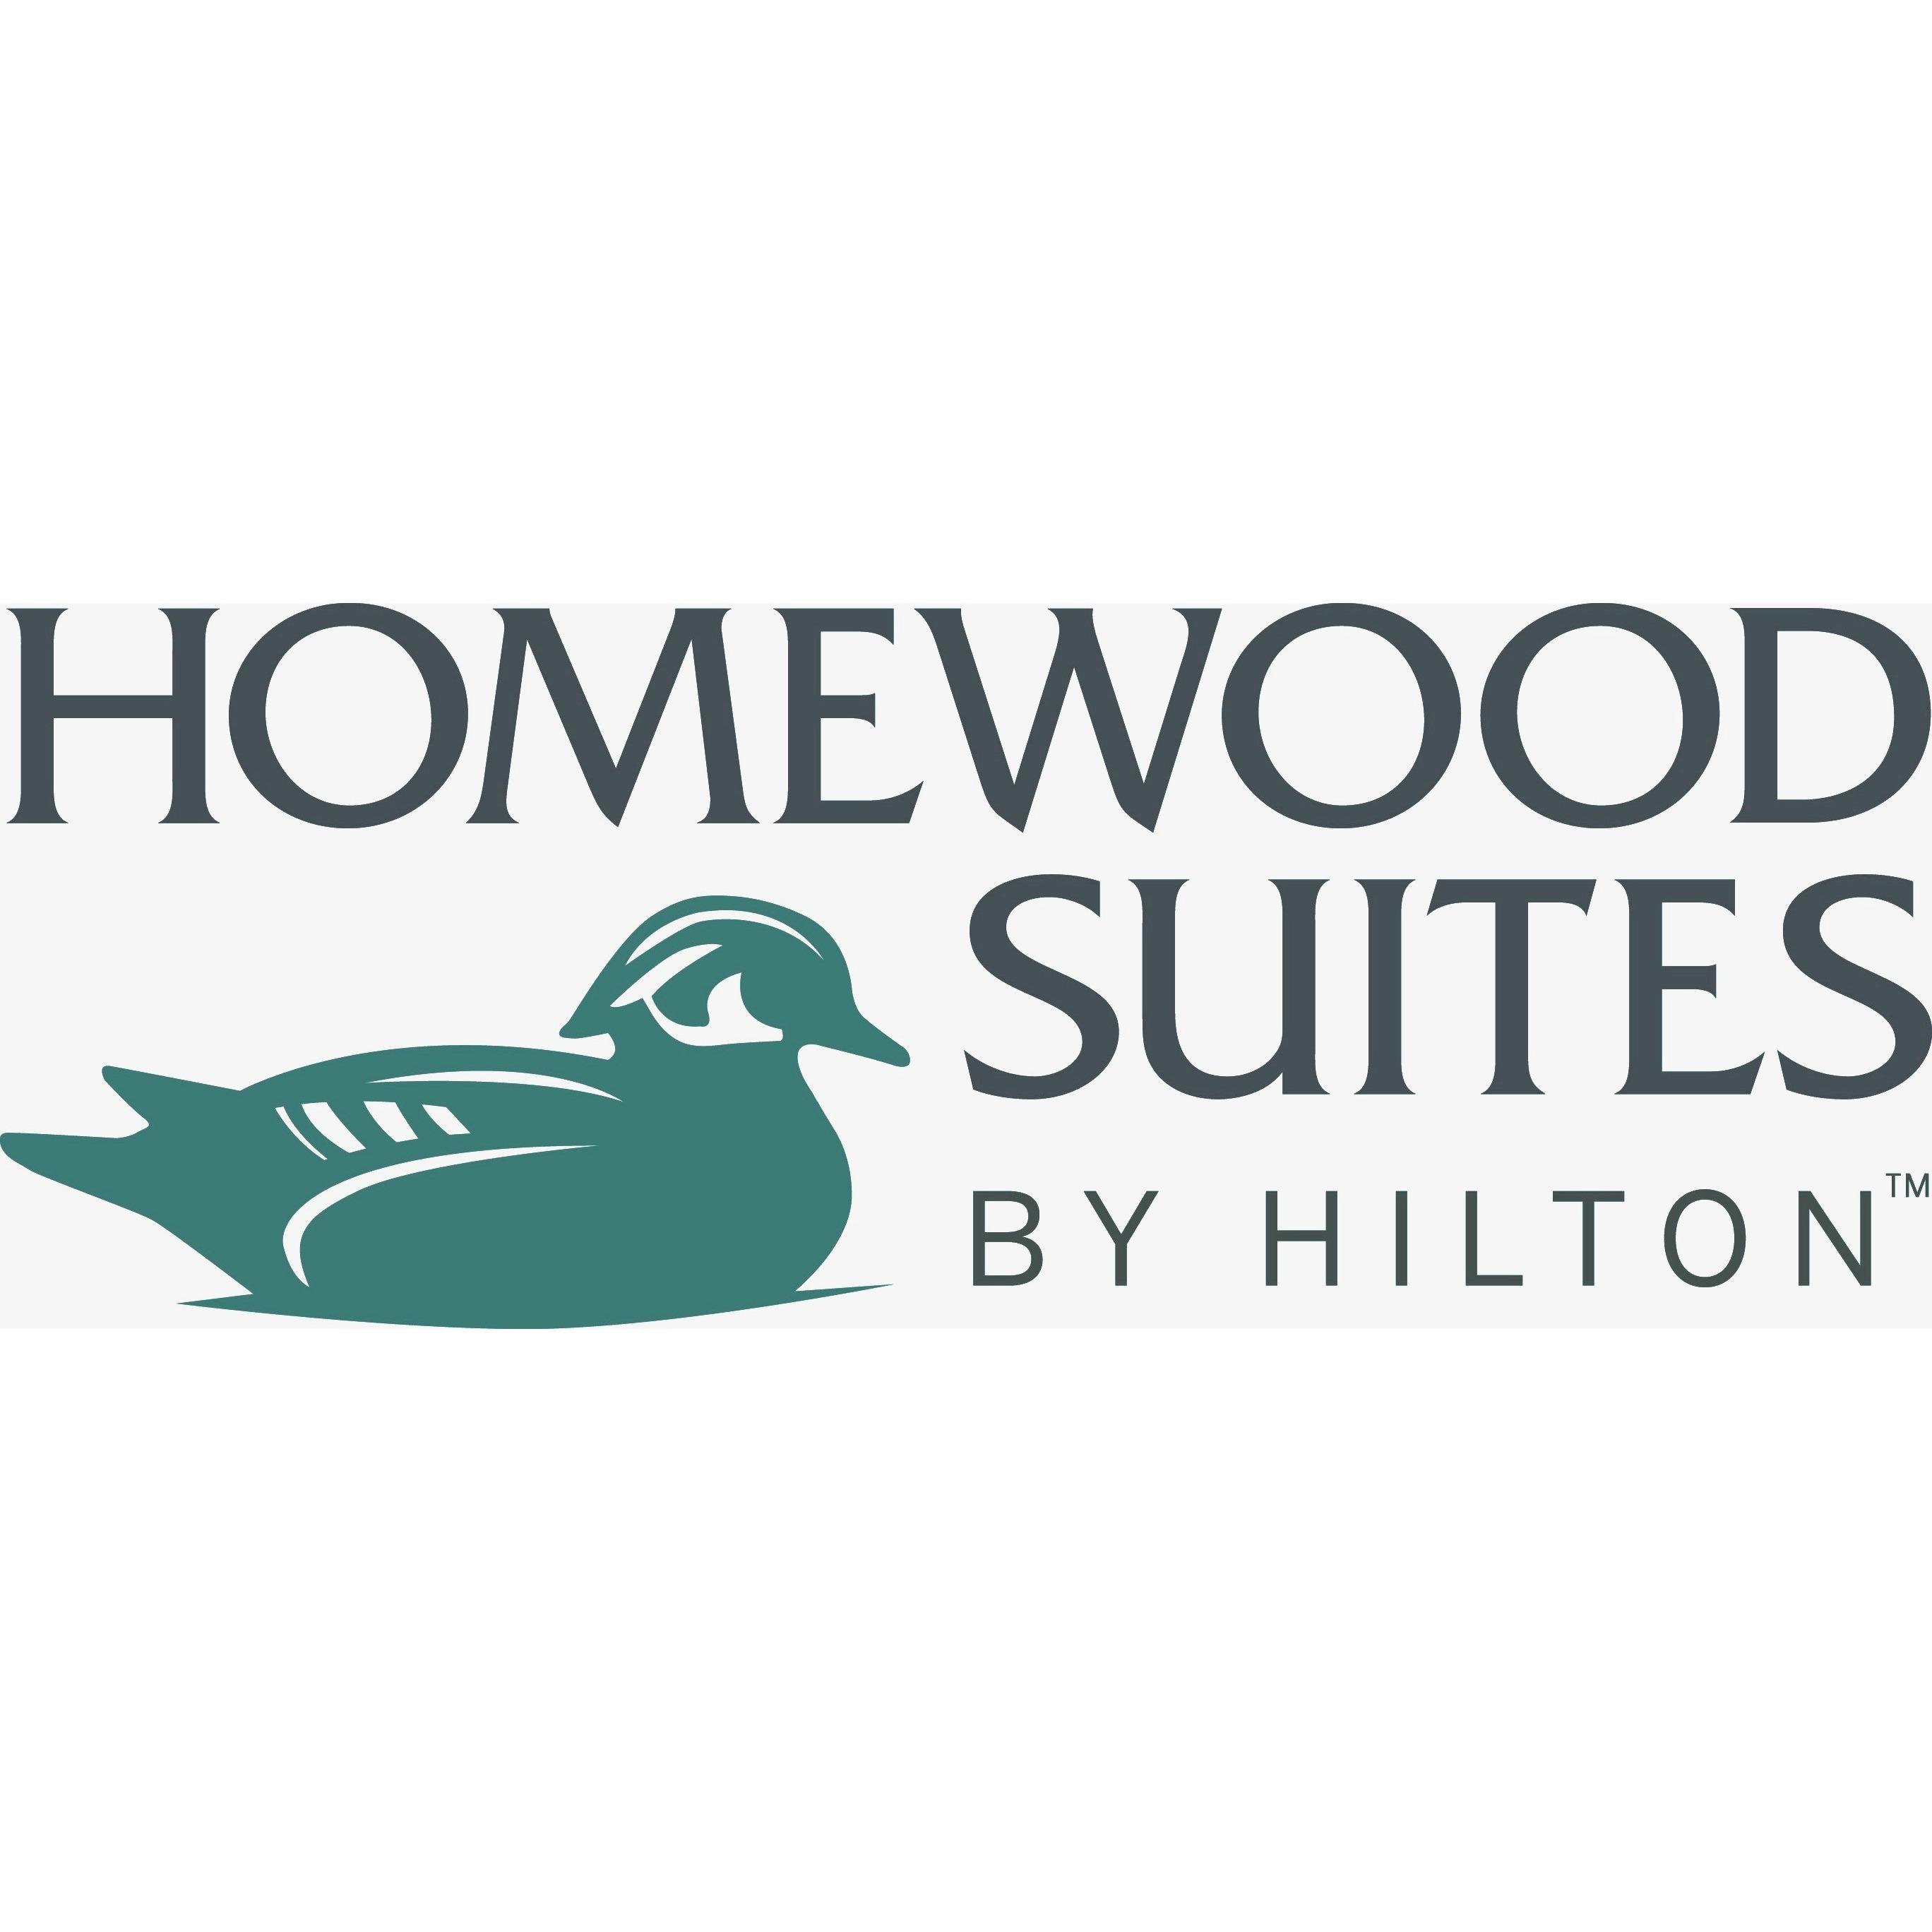 Homewood Suites by Hilton Metairie New Orleans Logo